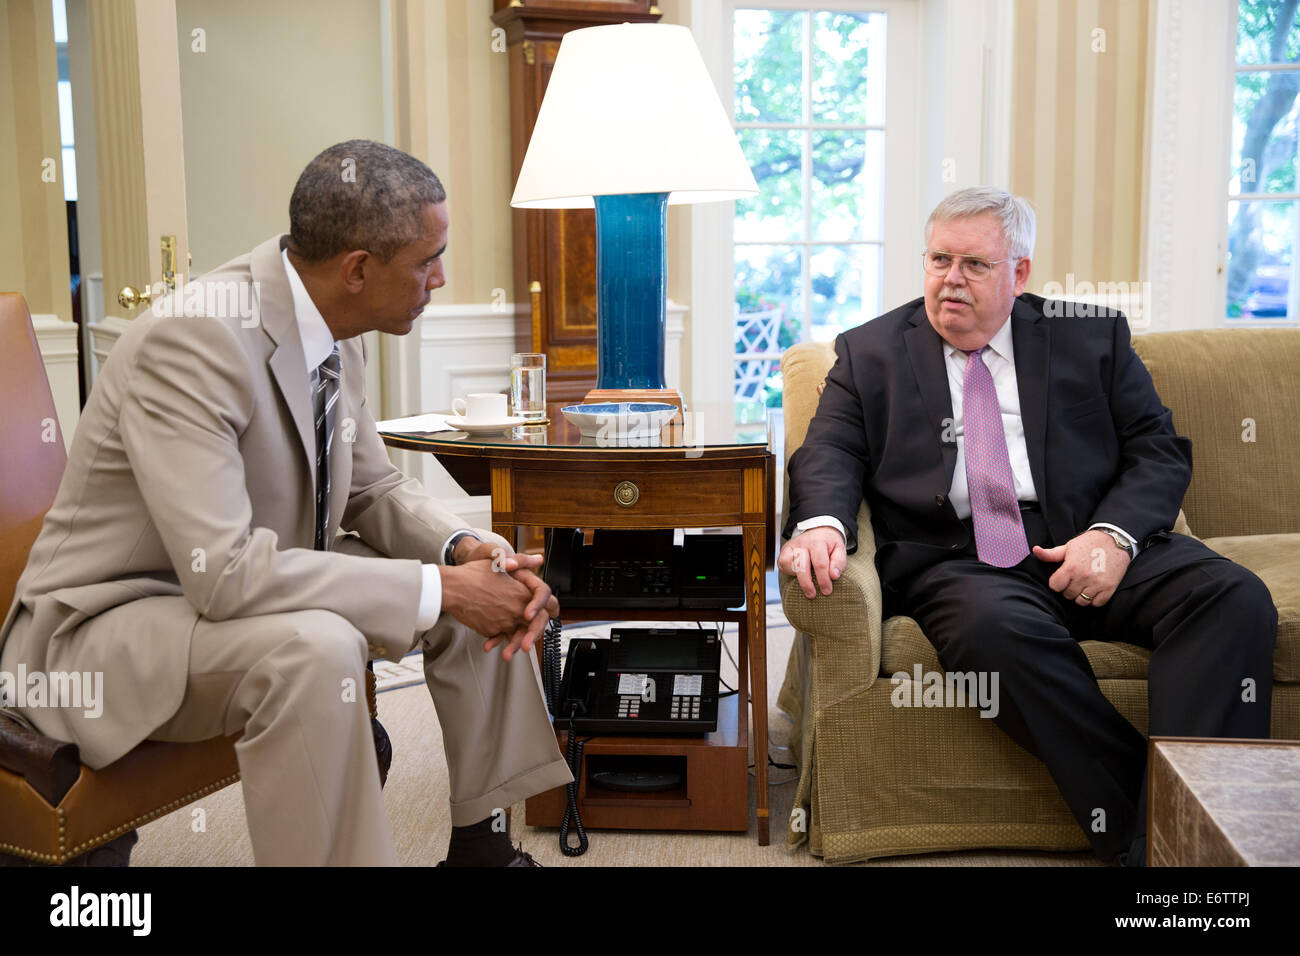 US President Barack Obama meets with U.S. Ambassador to Russia, John F. Tefft, in the Oval Office of the White House to discuss the situation in Ukraine August 28, 2014 in Washington, DC. Stock Photo